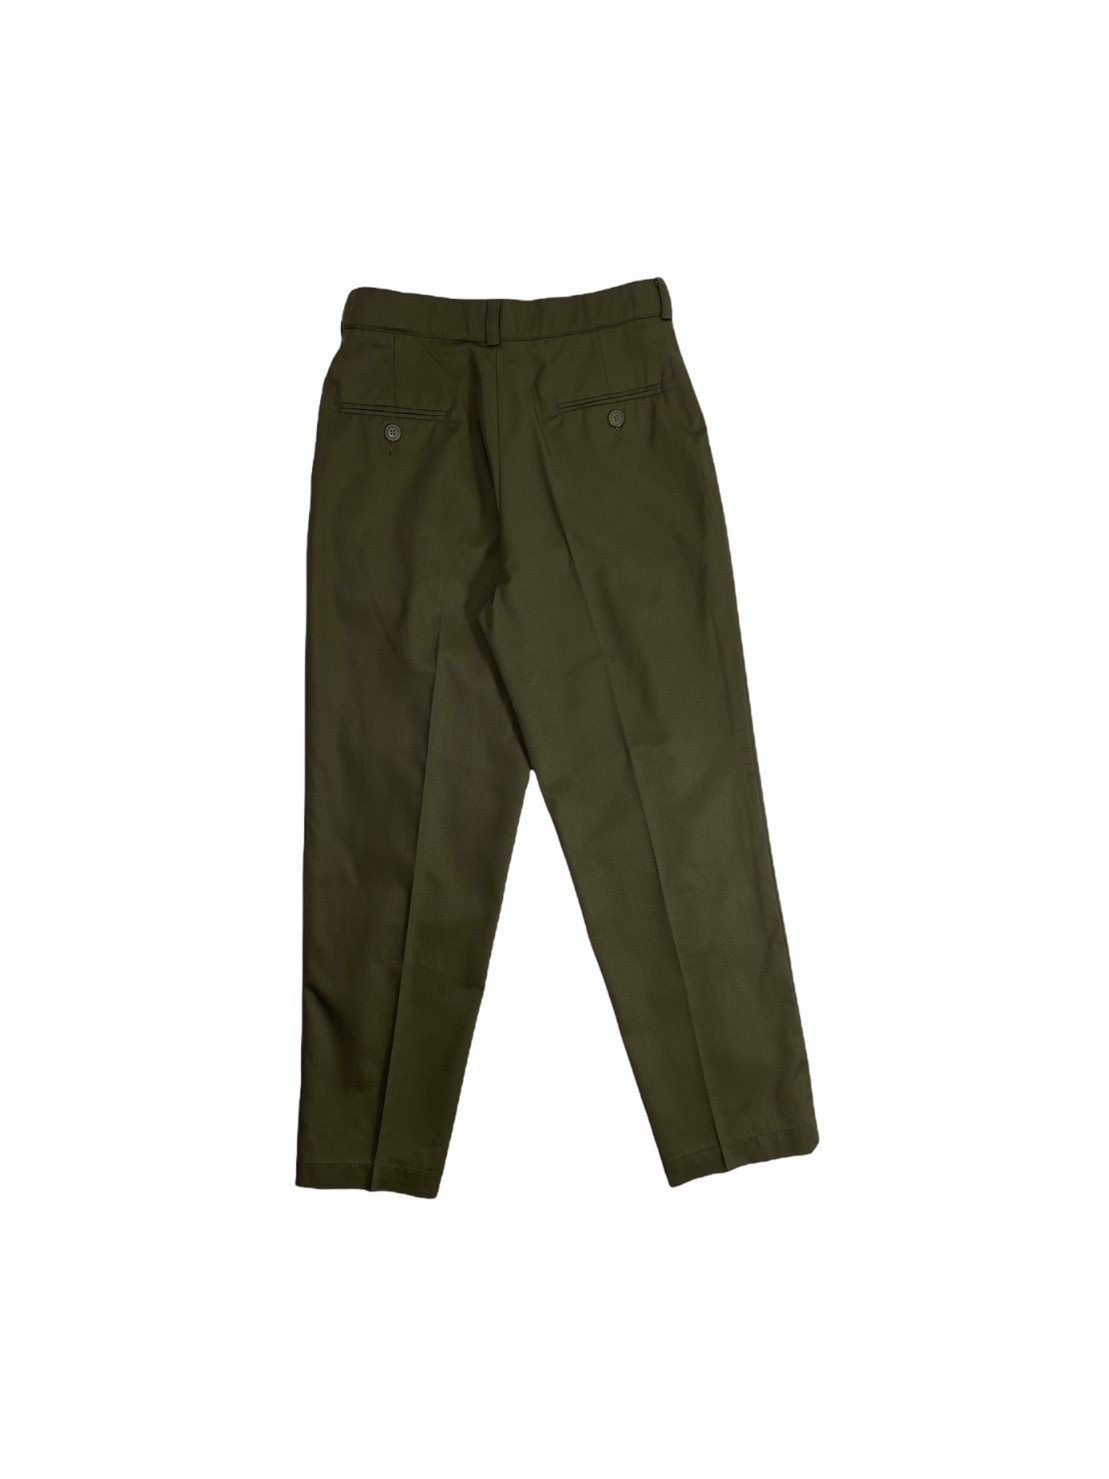 FRANK! Officer Trousers (Russian Green)